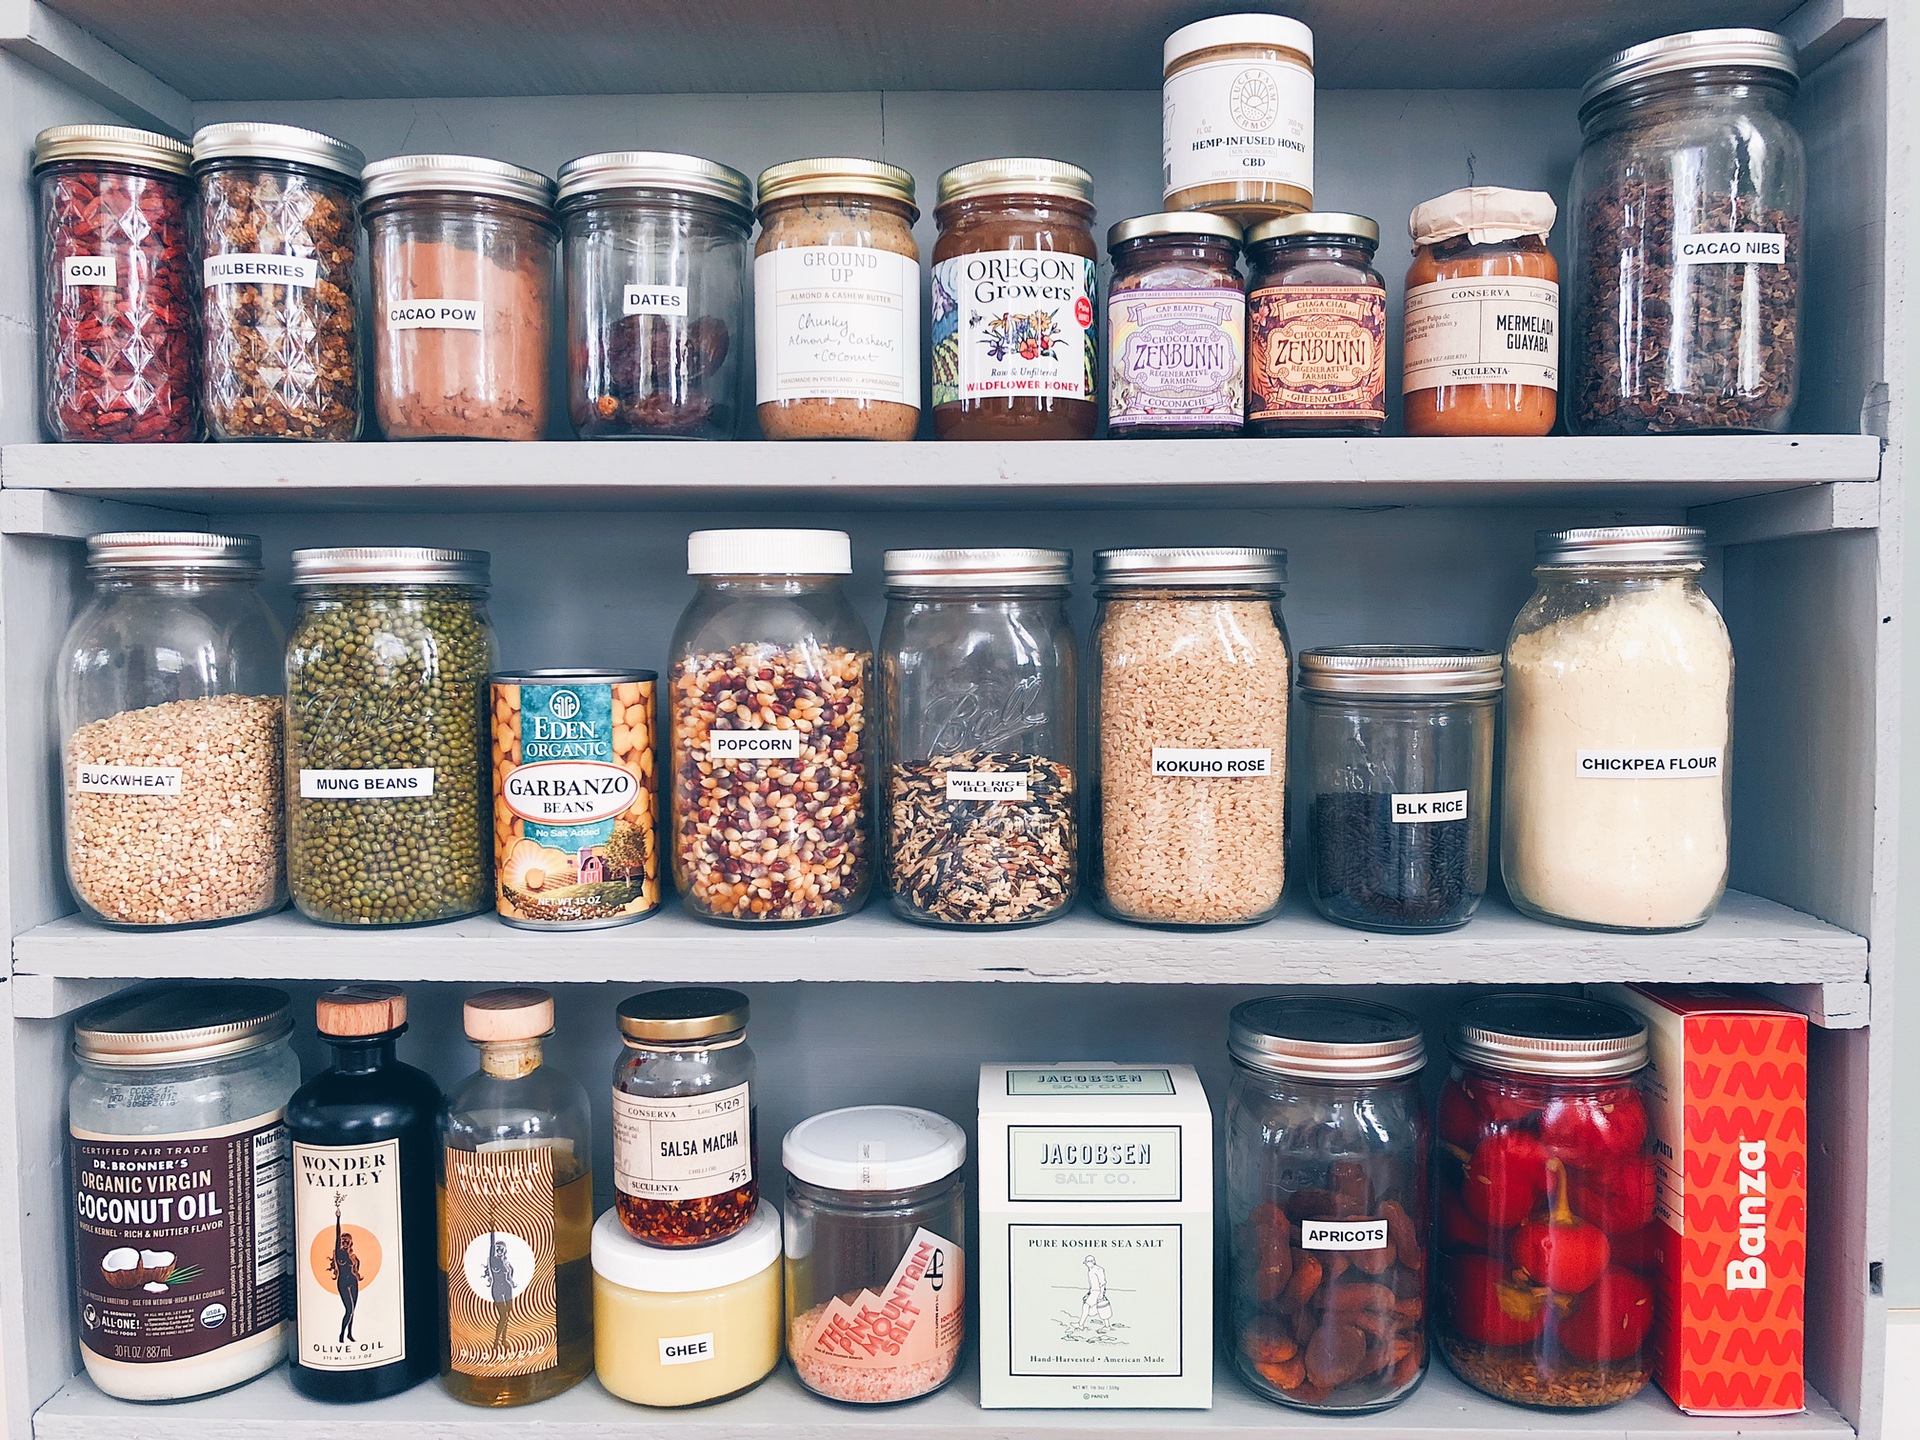 Shelves with jars of pantry staple items